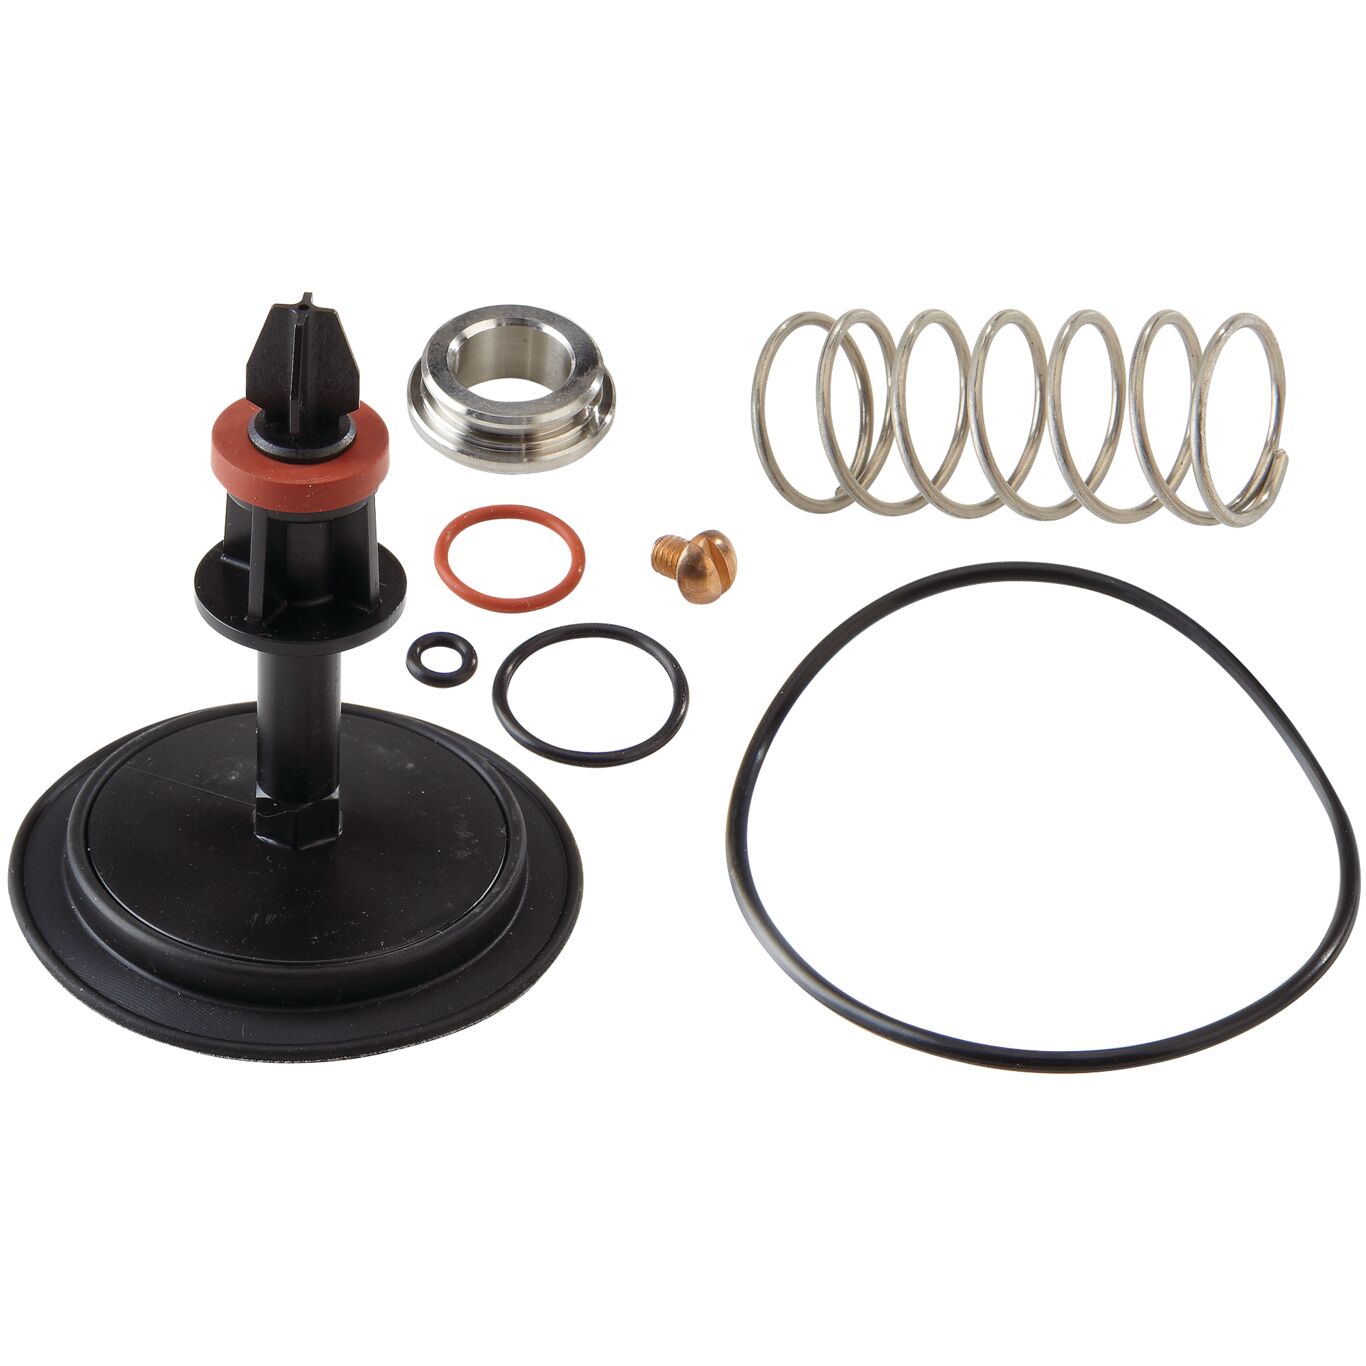 Watts 2 1/2" 3" Rubber Total Repair Kit for the 709 Device 0887915 887915